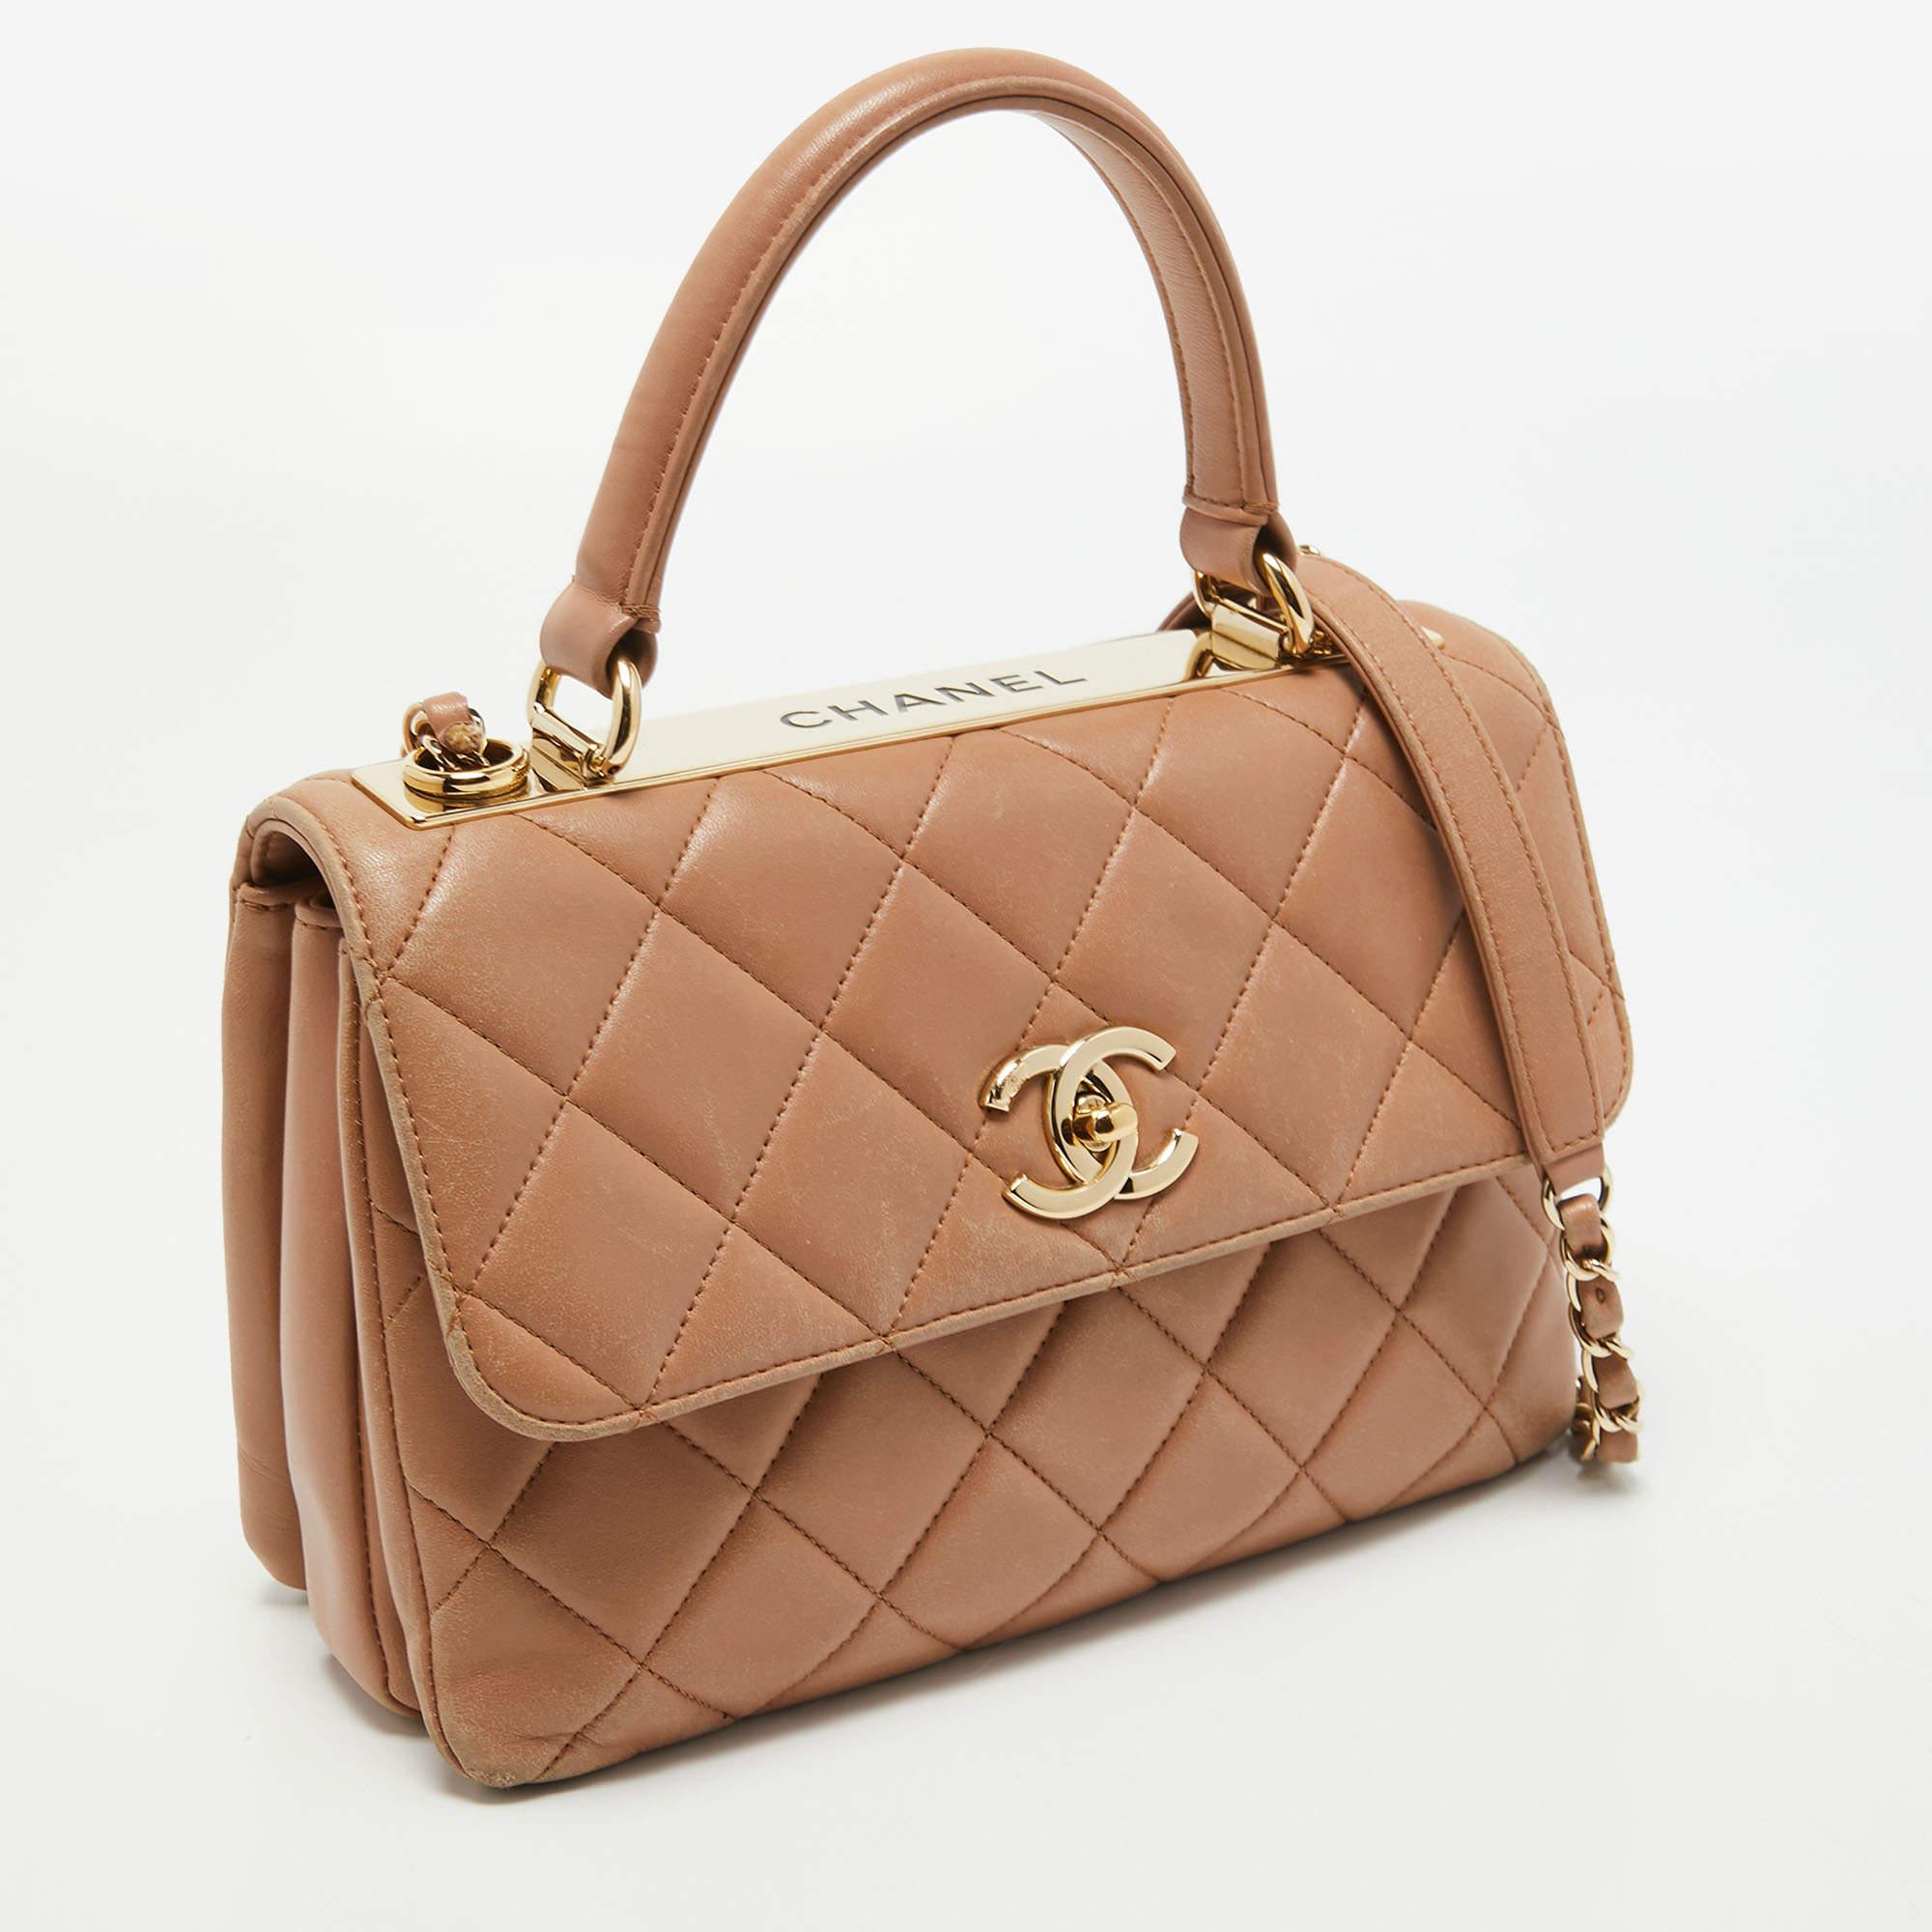 Women's Chanel Beige Quilted Leather Small Trendy CC Flap Top Handle Bag